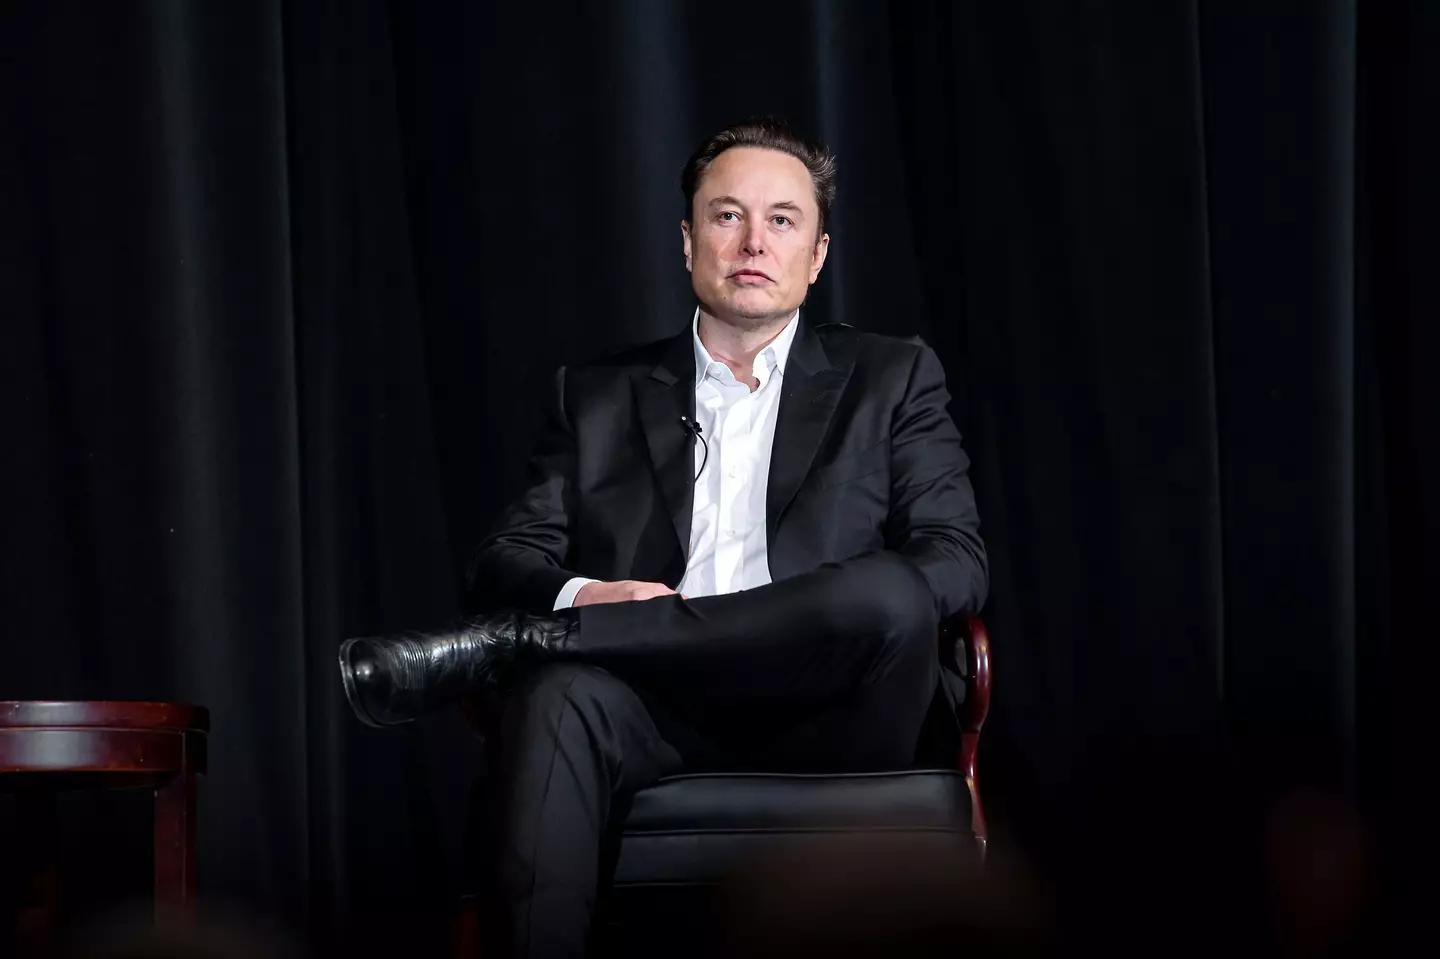 Elon Musk called attempts to subpoena him 'idiotic on so many levels'.